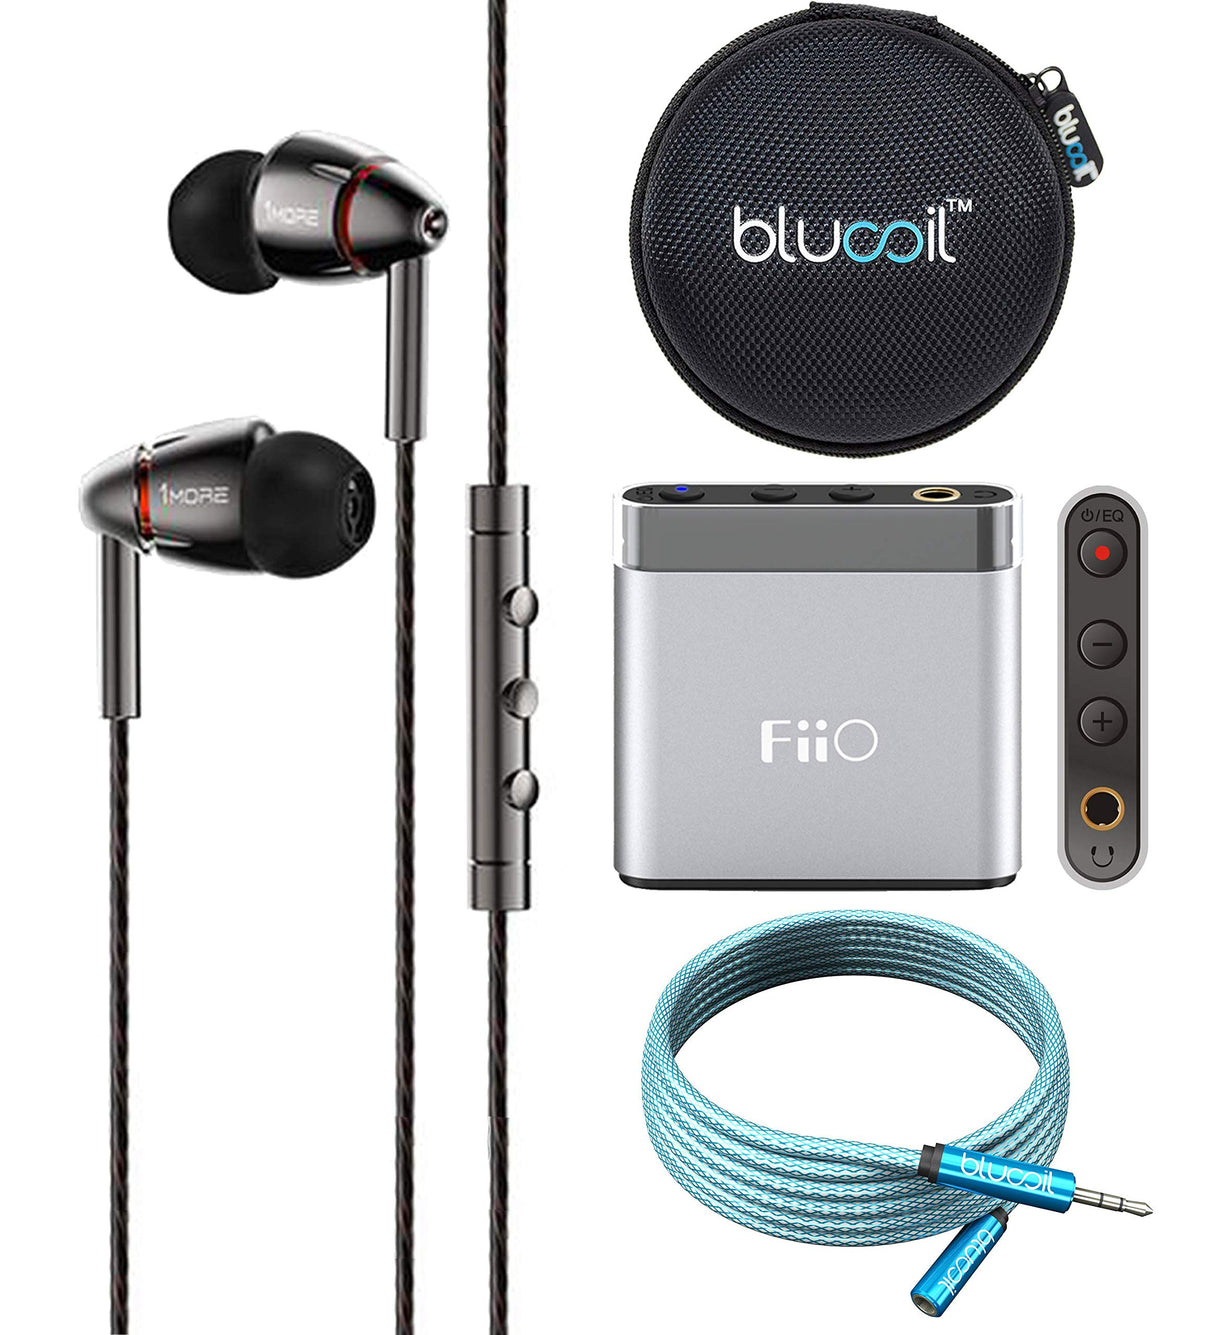 1MORE E1010 Quad Driver In-Ear Headphones Bundle with FiiO A1 Silver Portable Headphone Amplifier, Blucoil 6-FT Headphone Extension Cable (3.5mm), and Portable Earphone Hard Case